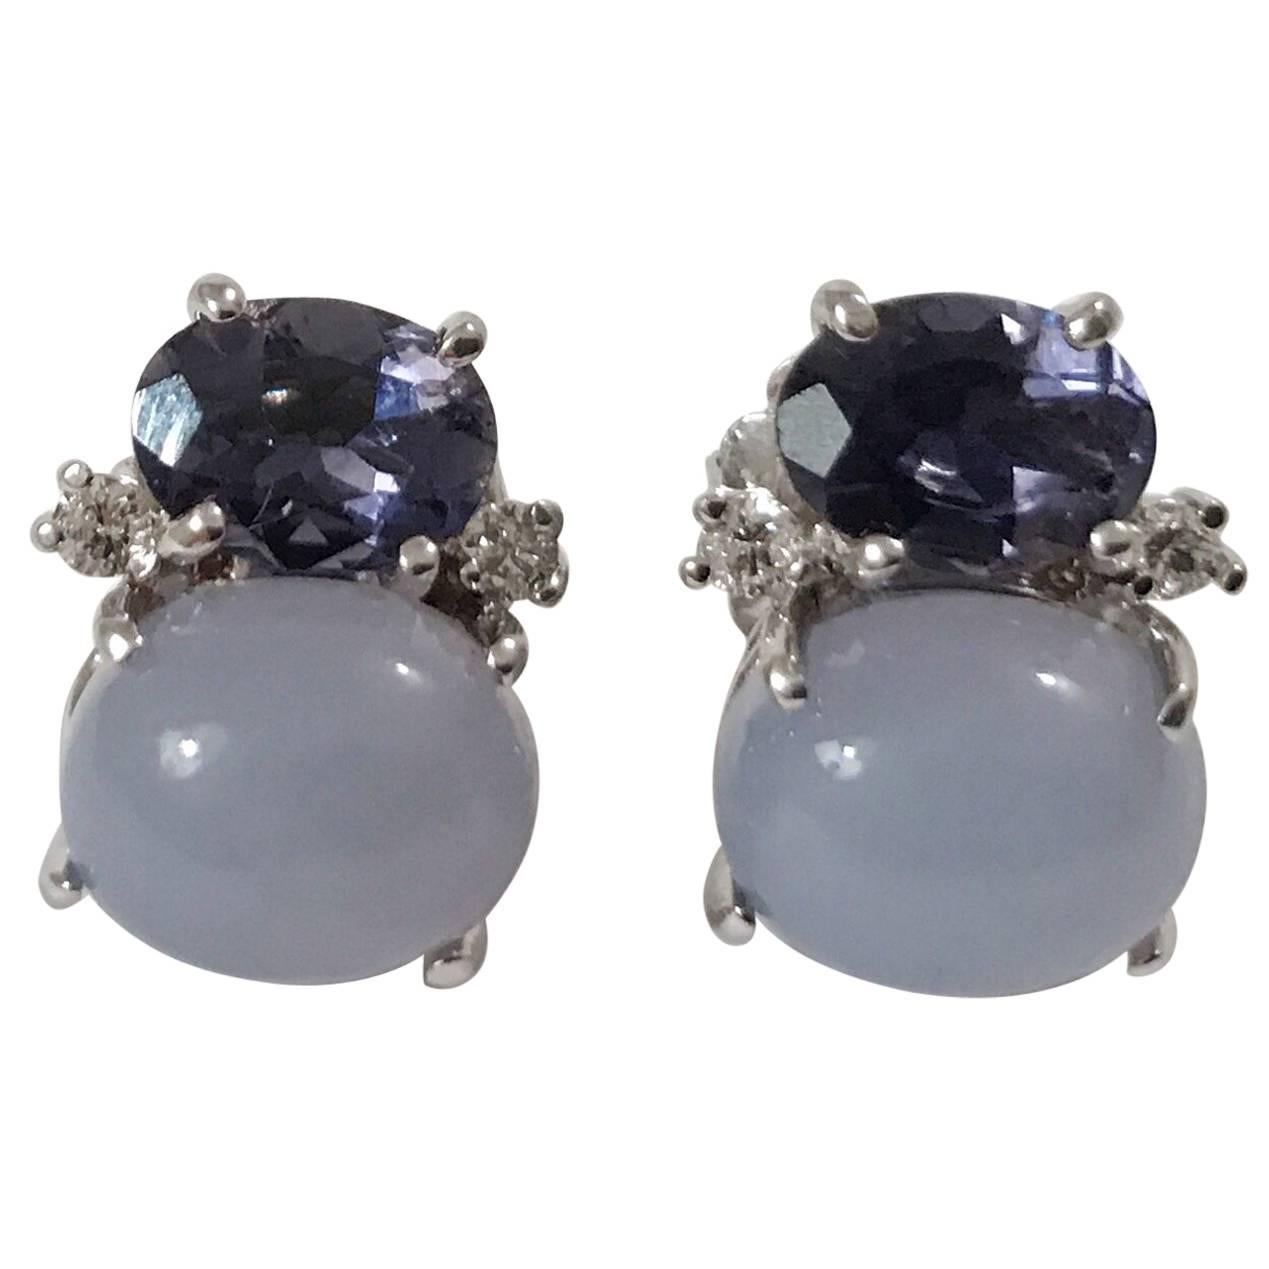 Mini 18kt white gold GUM DROP™ earrings with faceted Iolite (approximately 2 cts each), Cabochon Chalcedony (approximately 3 cts each), and 4 diamonds weighing ~ 0.20 cts.  
Specifications: Height: 5/8